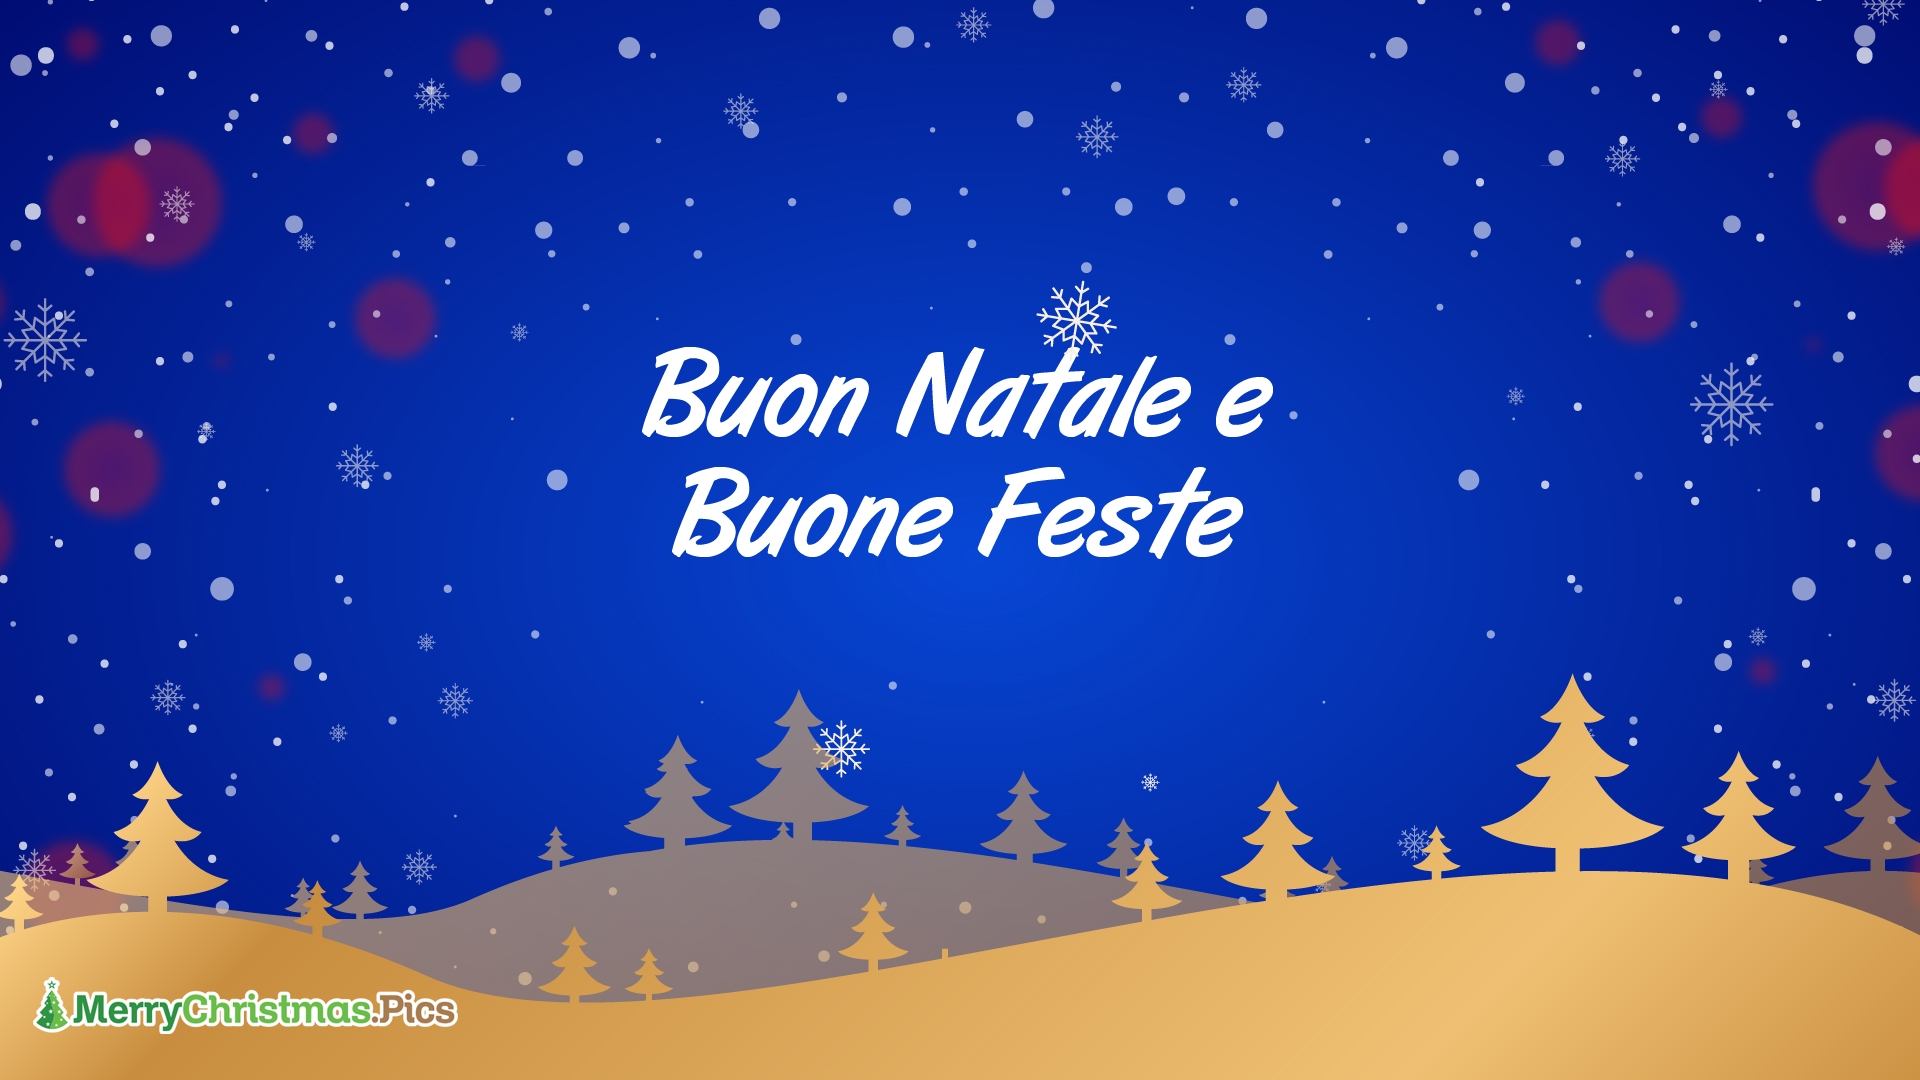 Italian Christmas Images Wallpapers